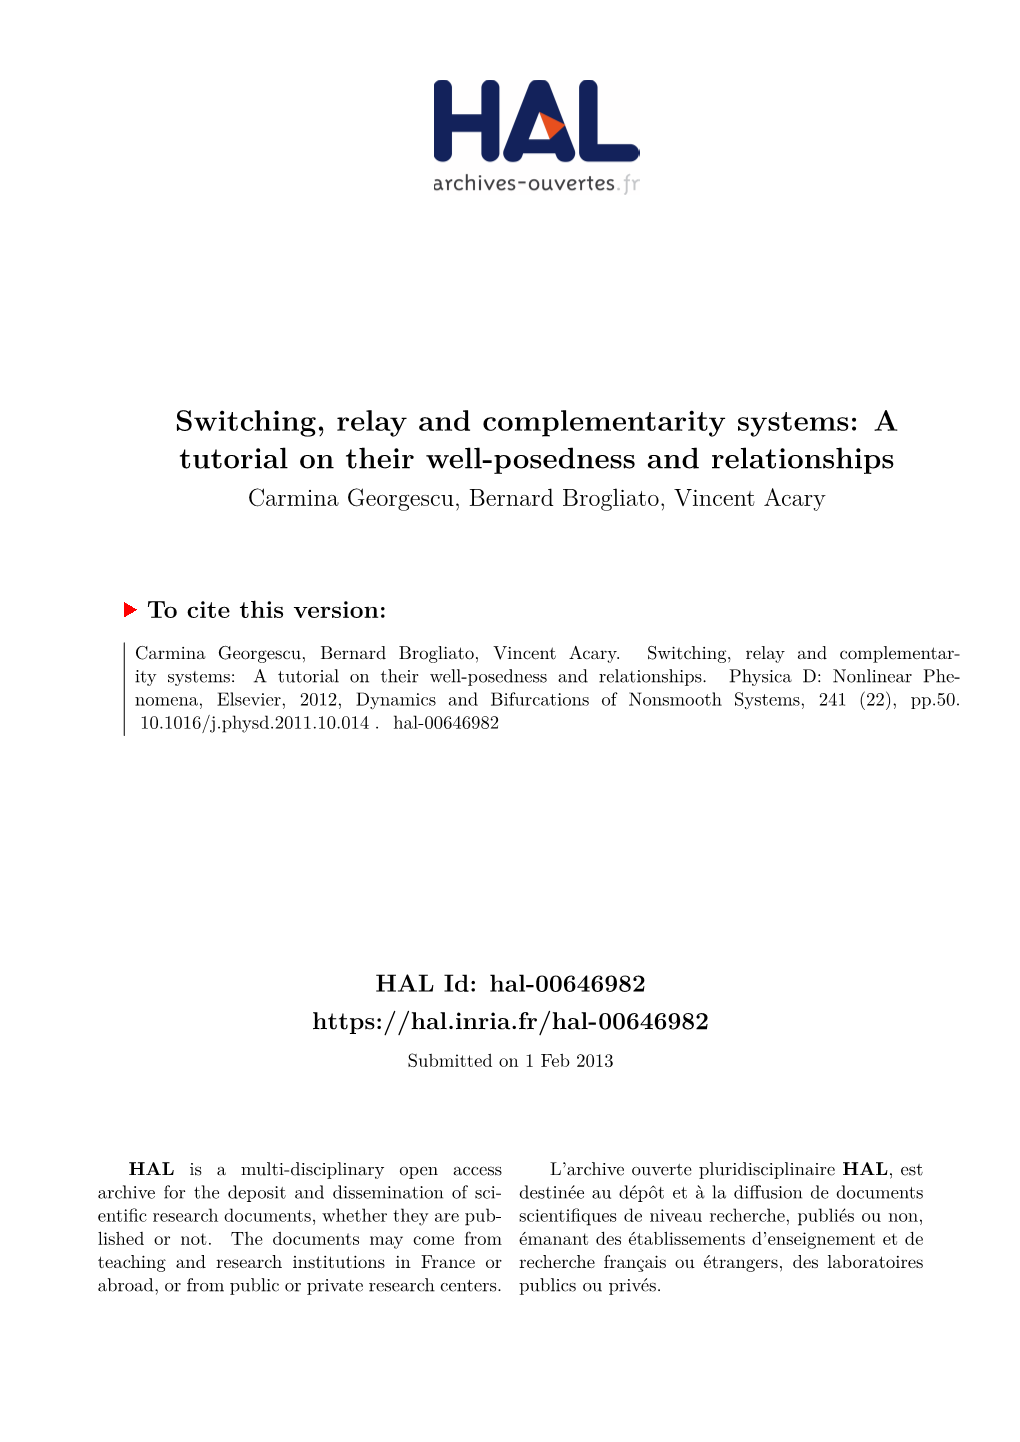 Switching, Relay and Complementarity Systems: a Tutorial on Their Well-Posedness and Relationships Carmina Georgescu, Bernard Brogliato, Vincent Acary